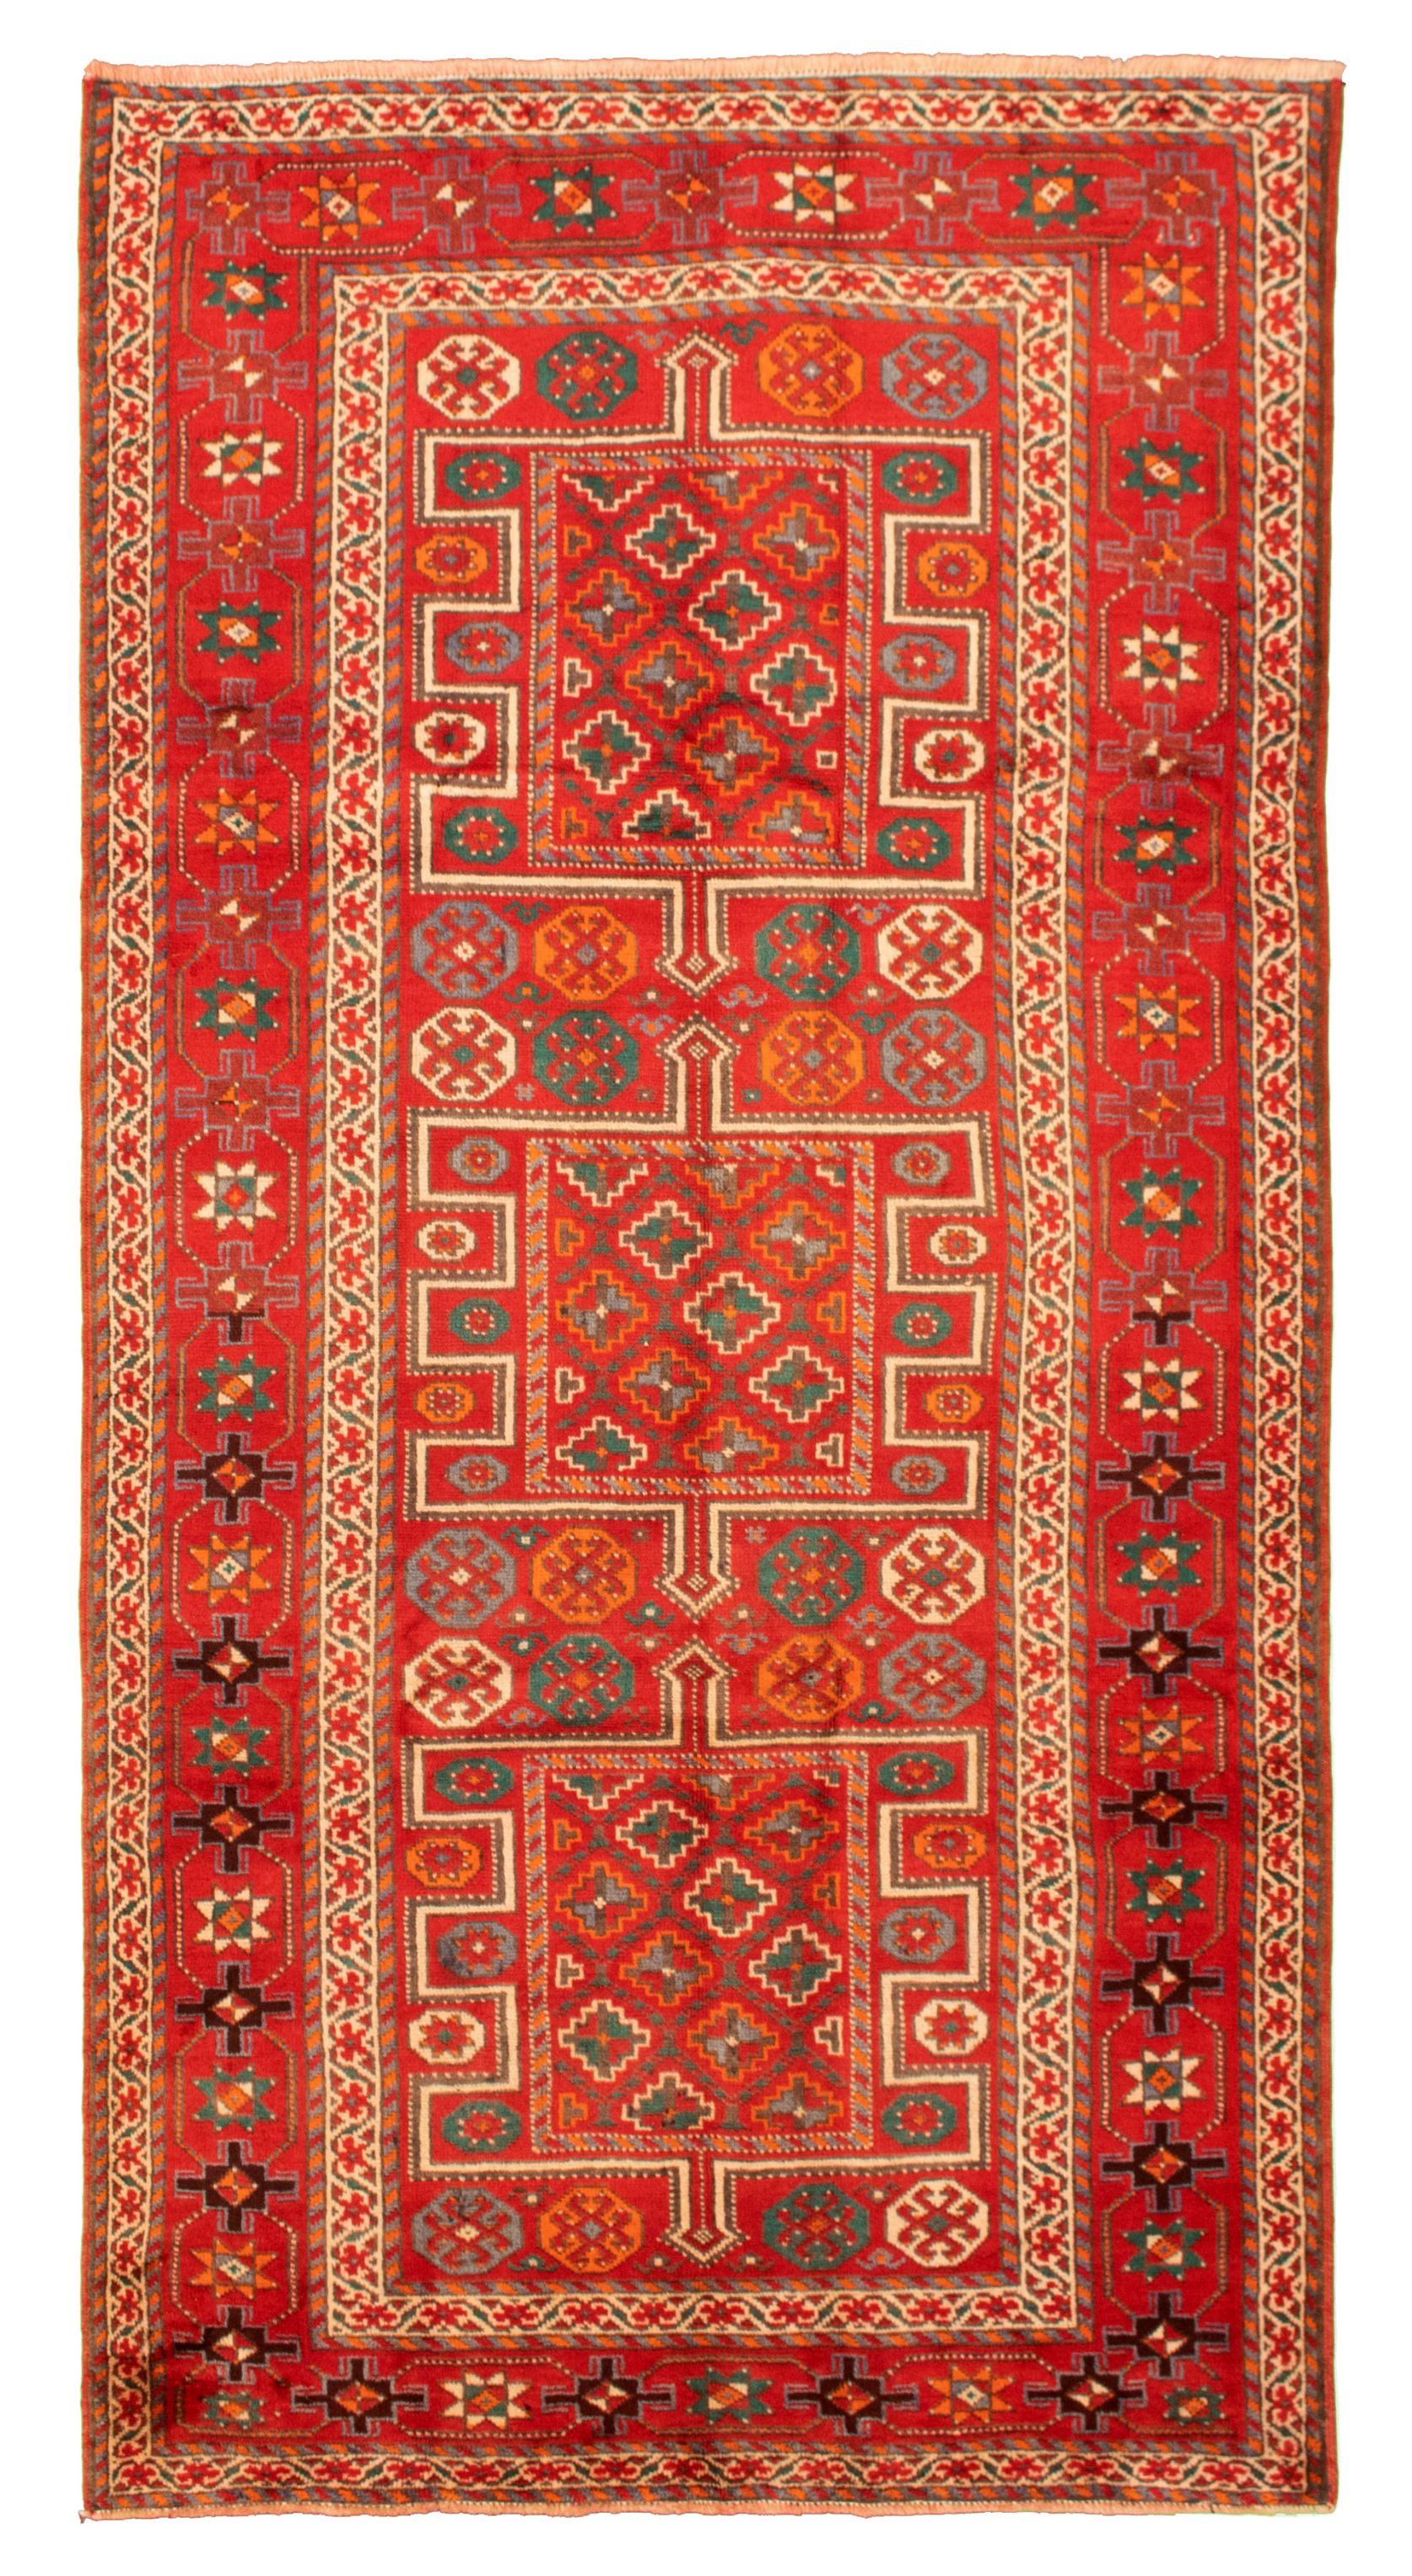 Hand-knotted Authentic Turkish Red Wool Rug 5'1" x 10'1"  Size: 5'1" x 10'1"  